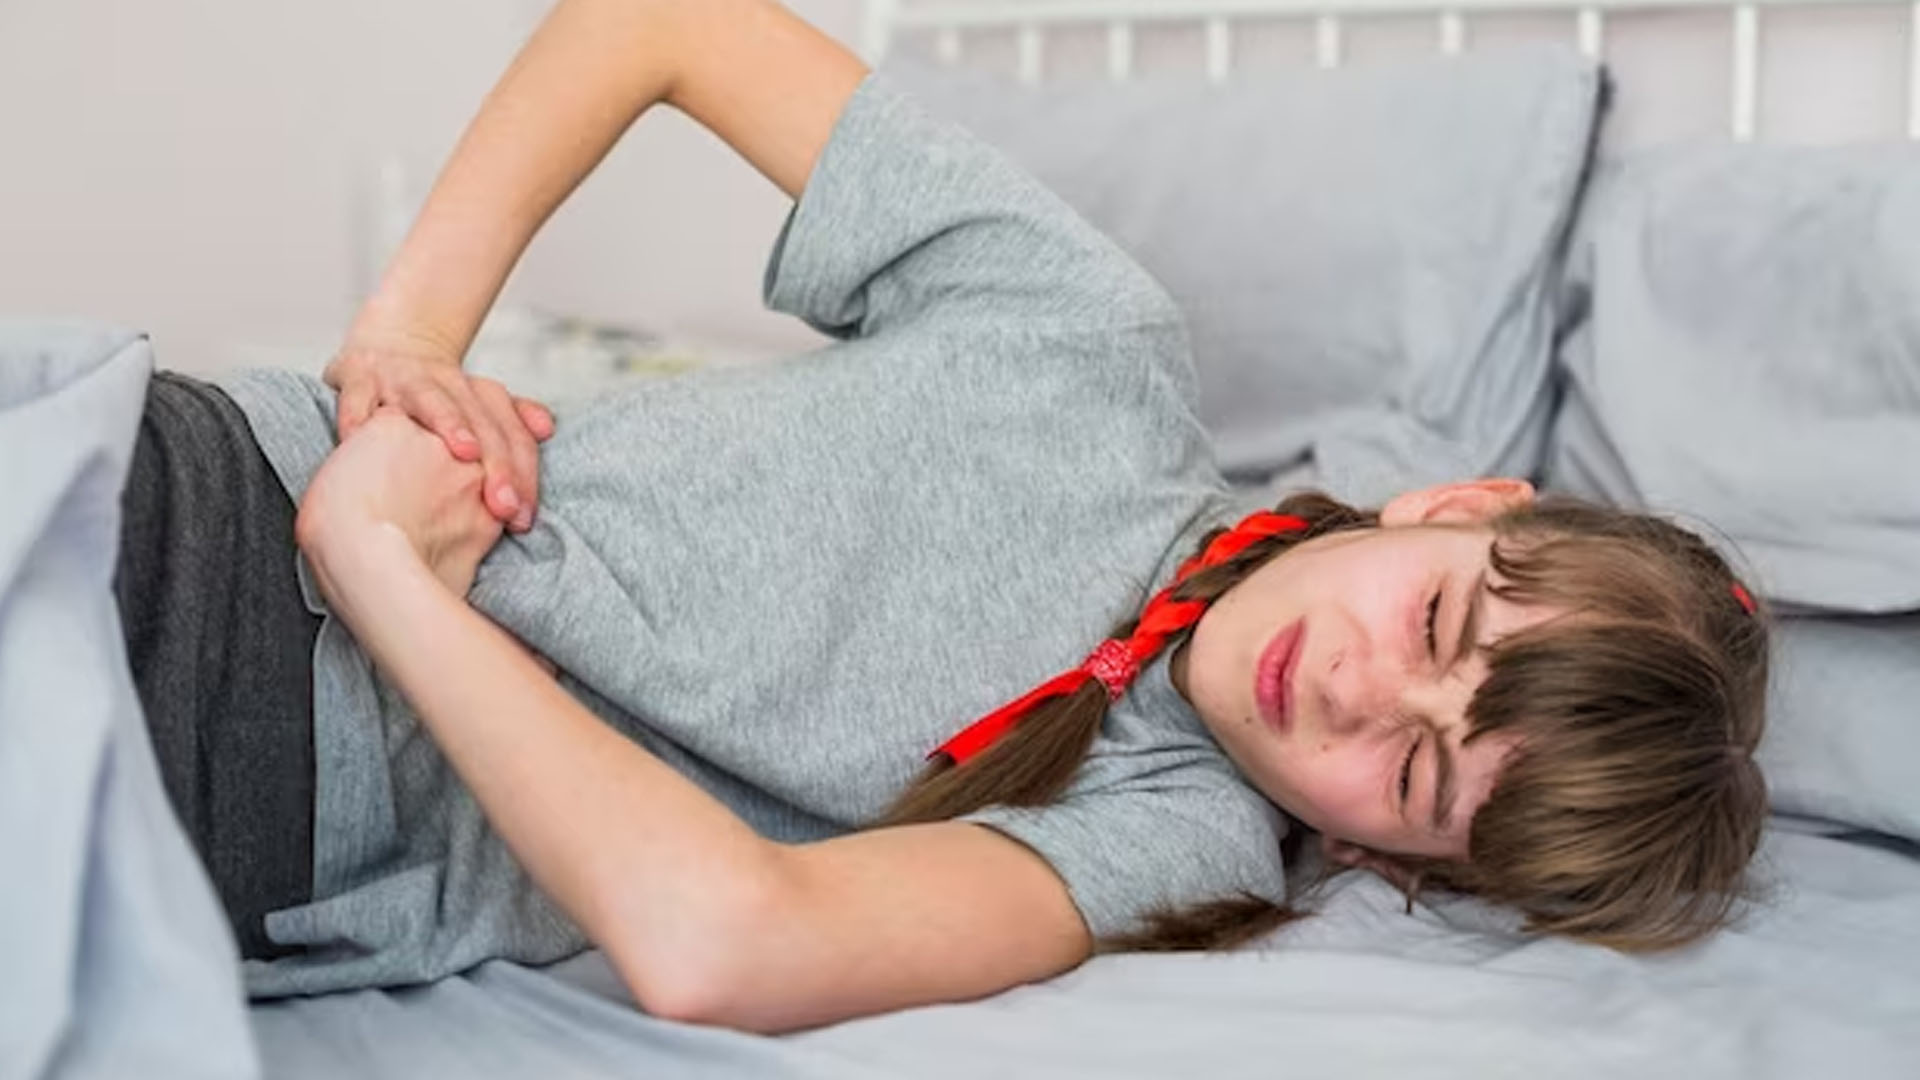 What are the Home Remedies to reduce Stomach Pain in Children?